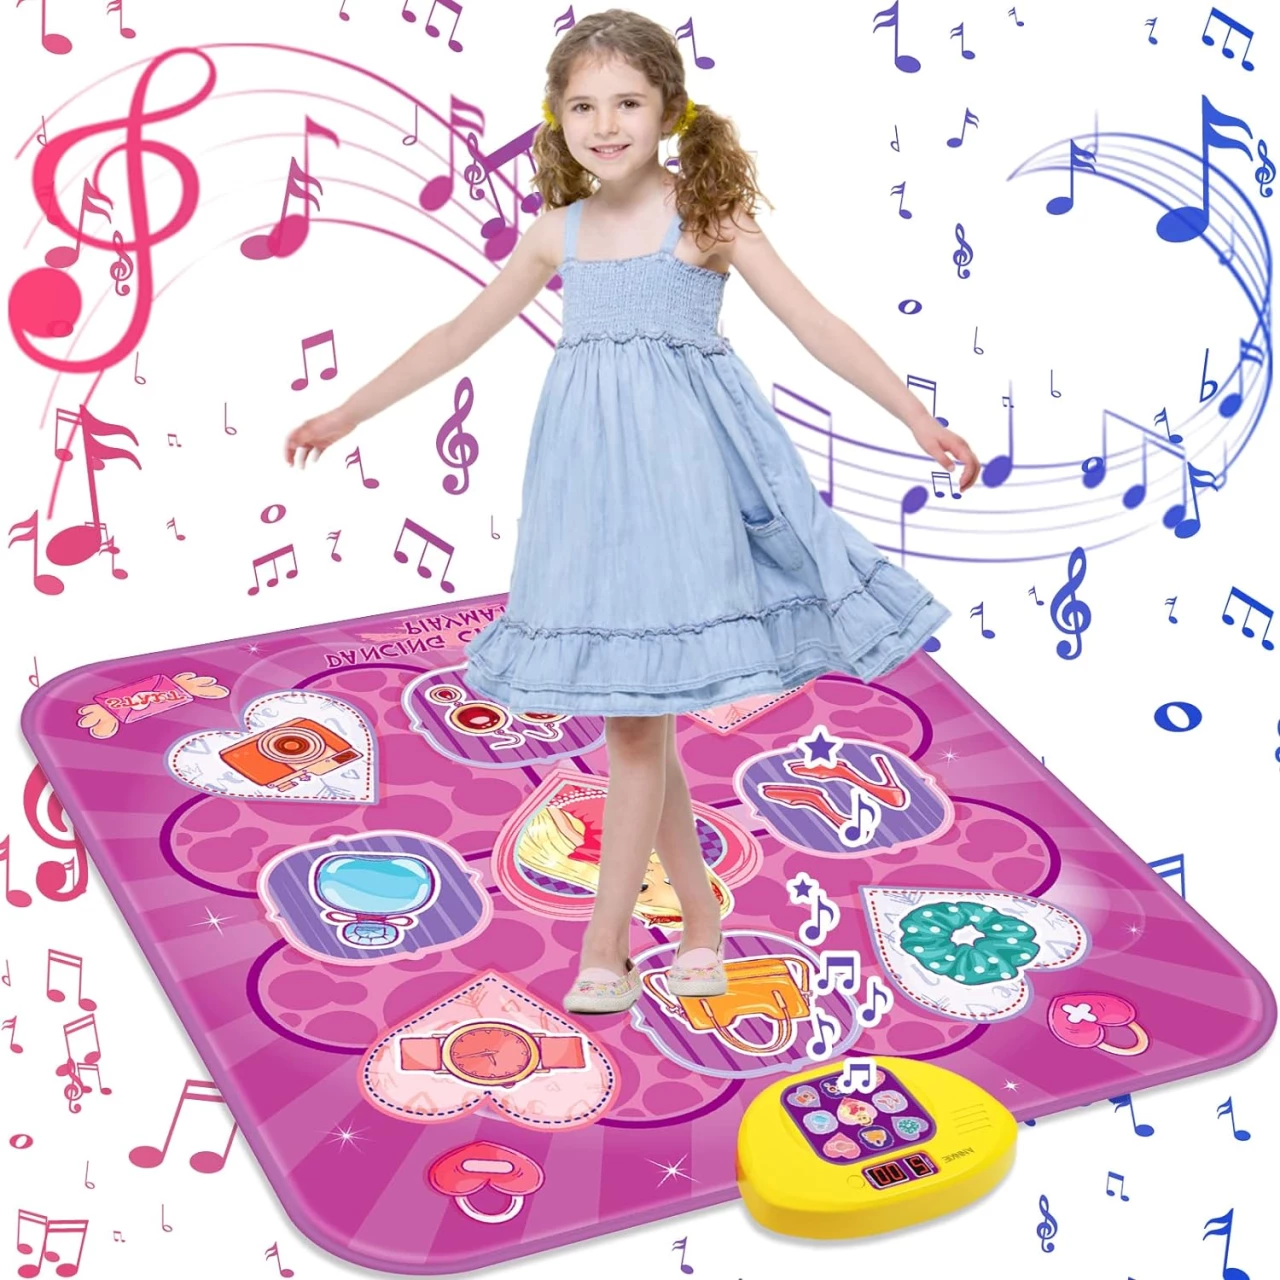 ANNKIE Kids Dance Mat | Toys for 3 4 5 6 7 8+ Year Old Girls | Electronic Music Dance Pad with LED Lights,5 Game Modes,Birthday Gifts for 3-8 Year Old Girls